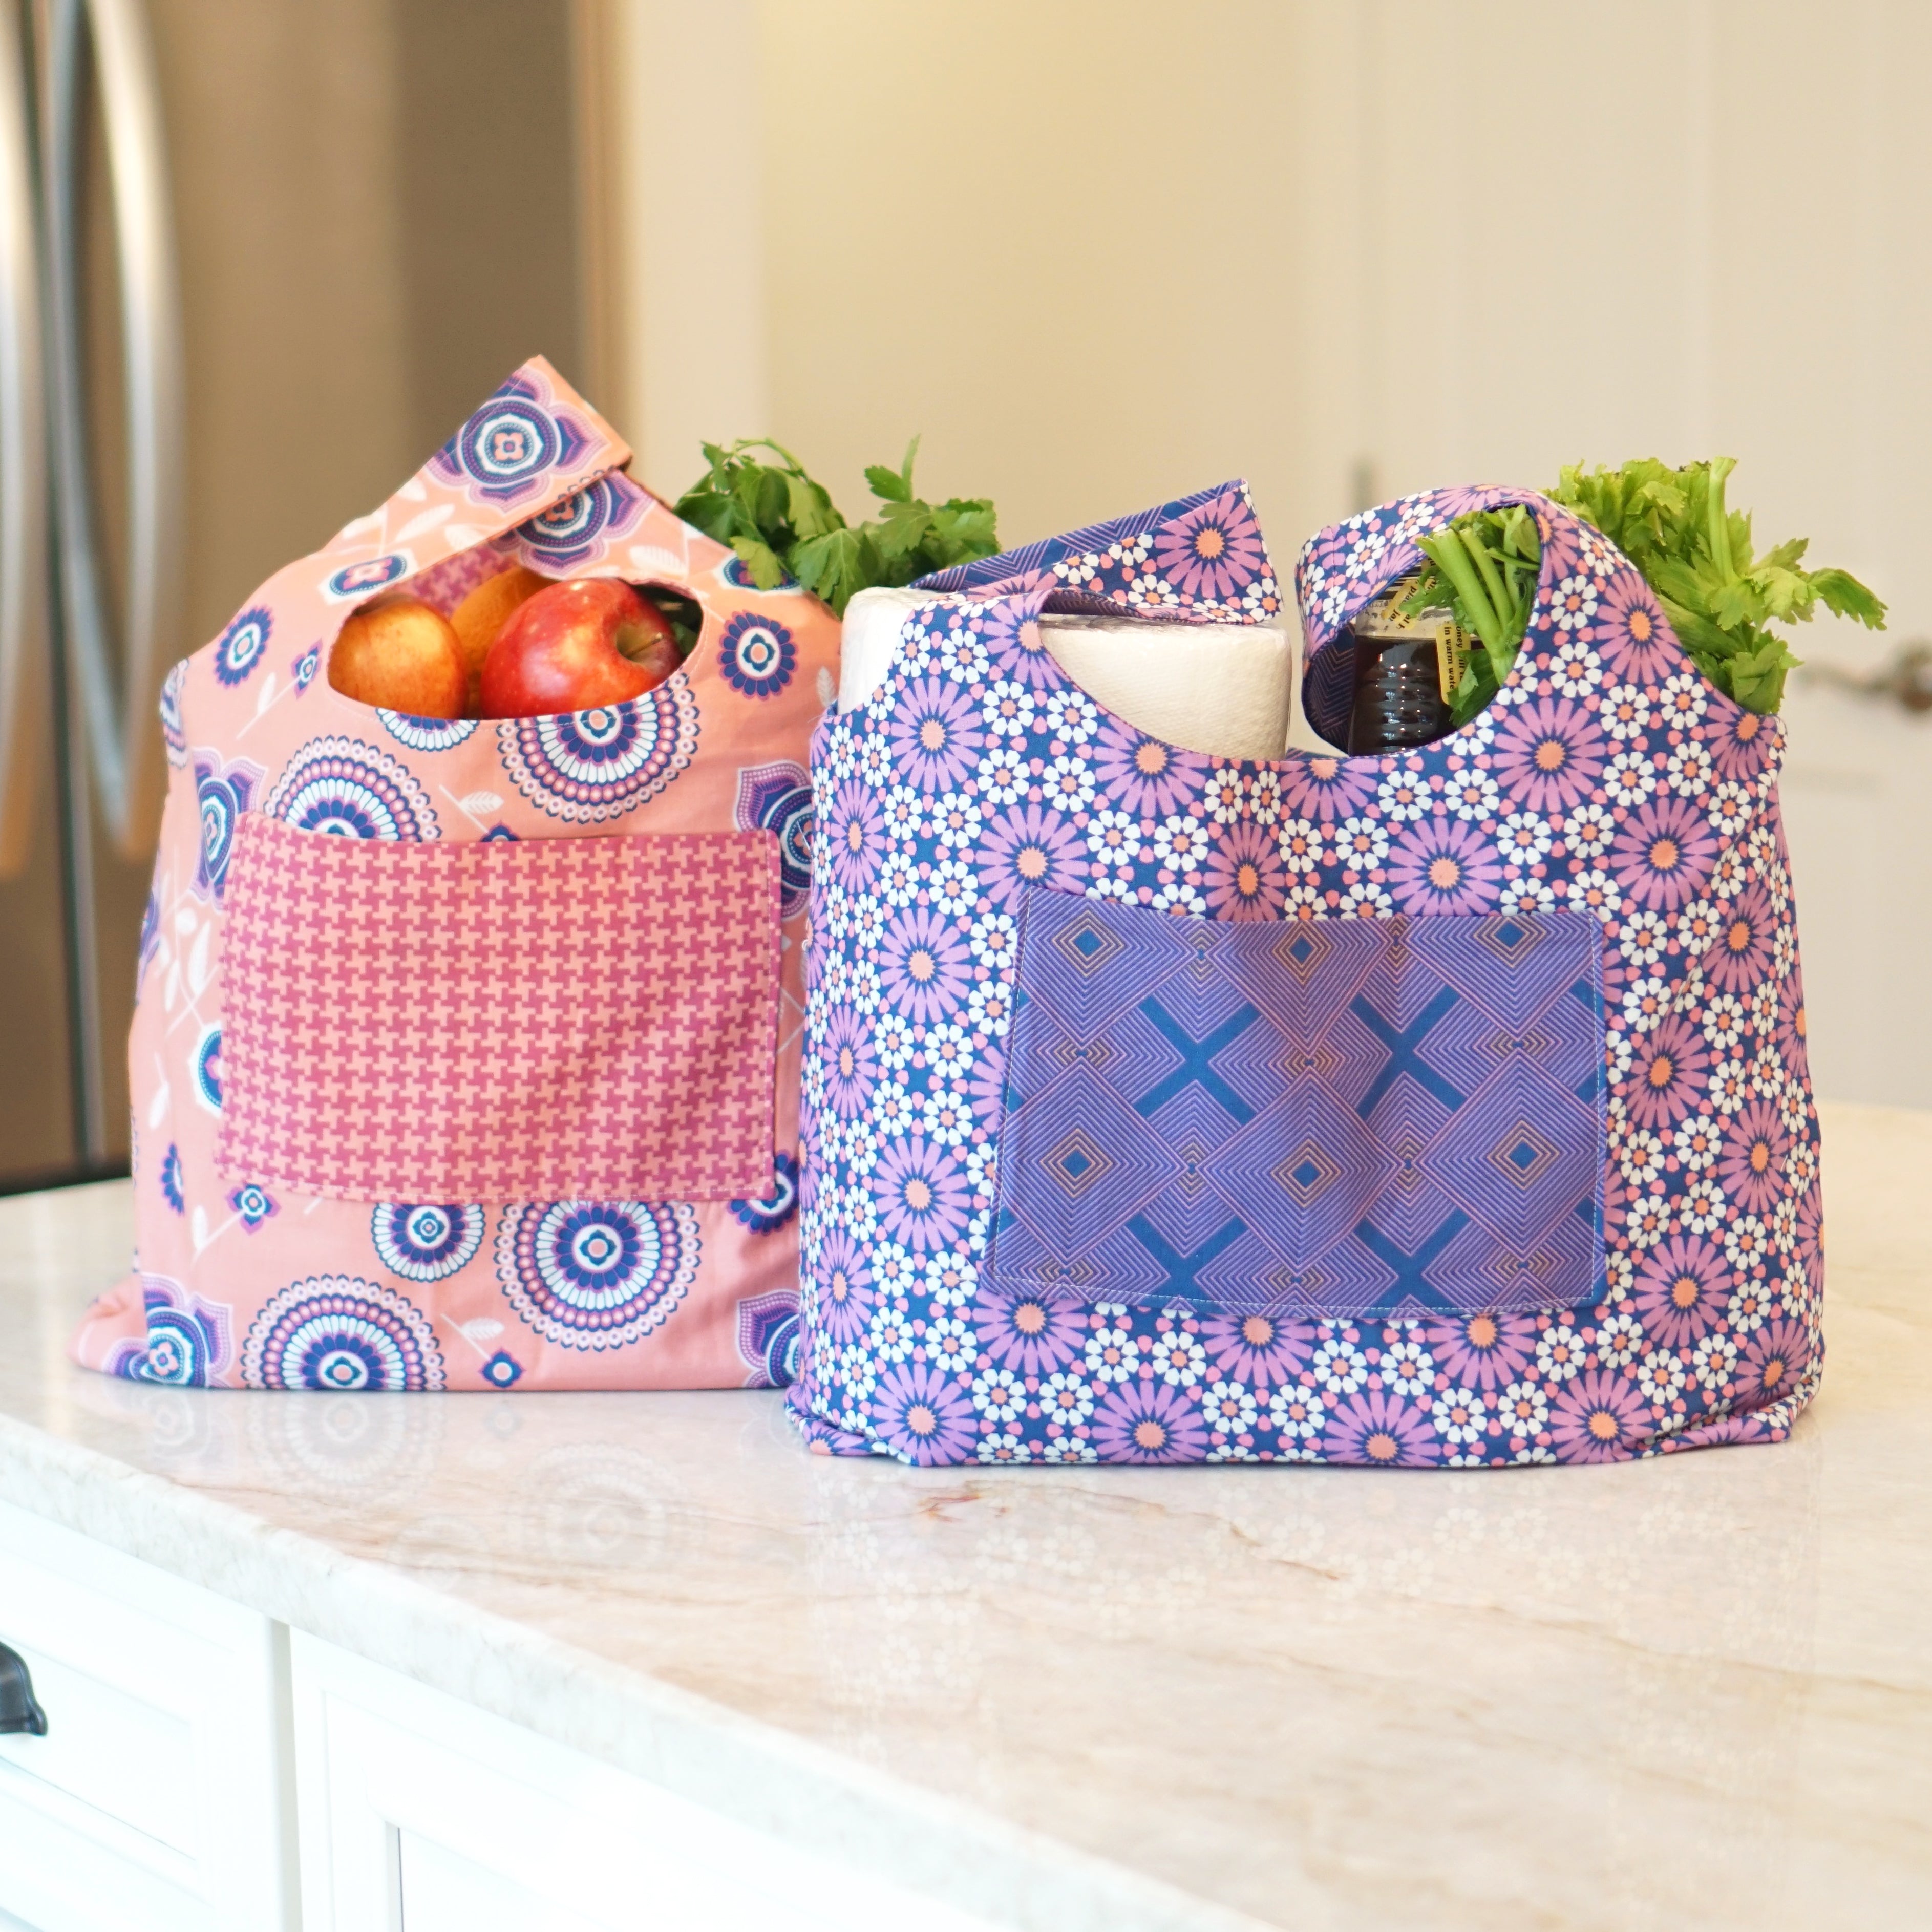 The Waste Free Lunch Bag PDF Sewing Pattern